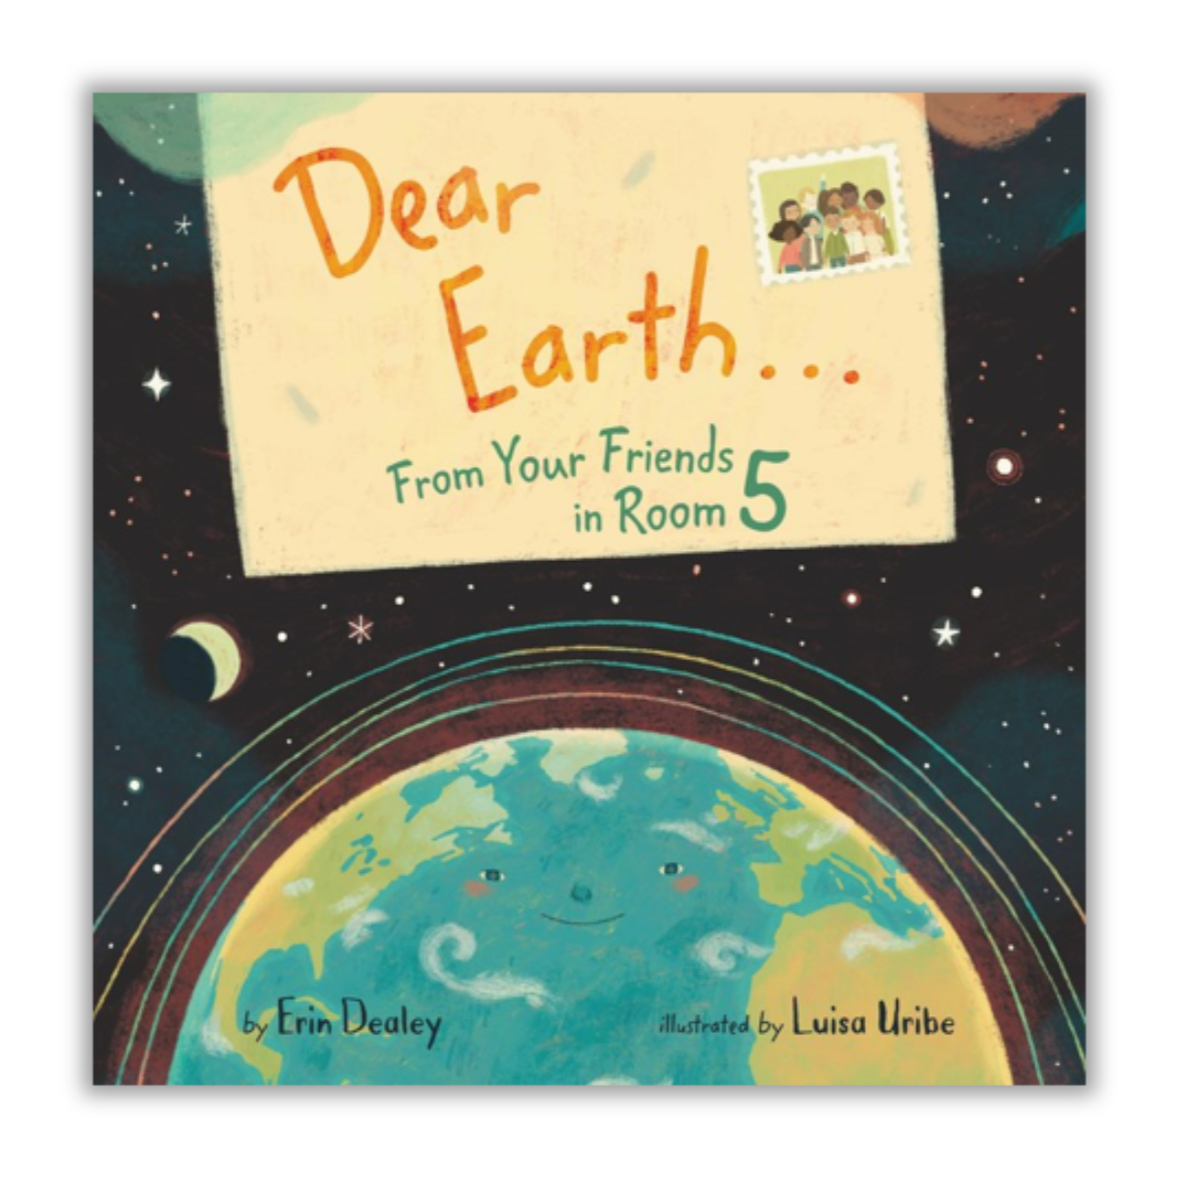 DEAR EARTH...FROM YOUR FRIENDS IN ROOM 5